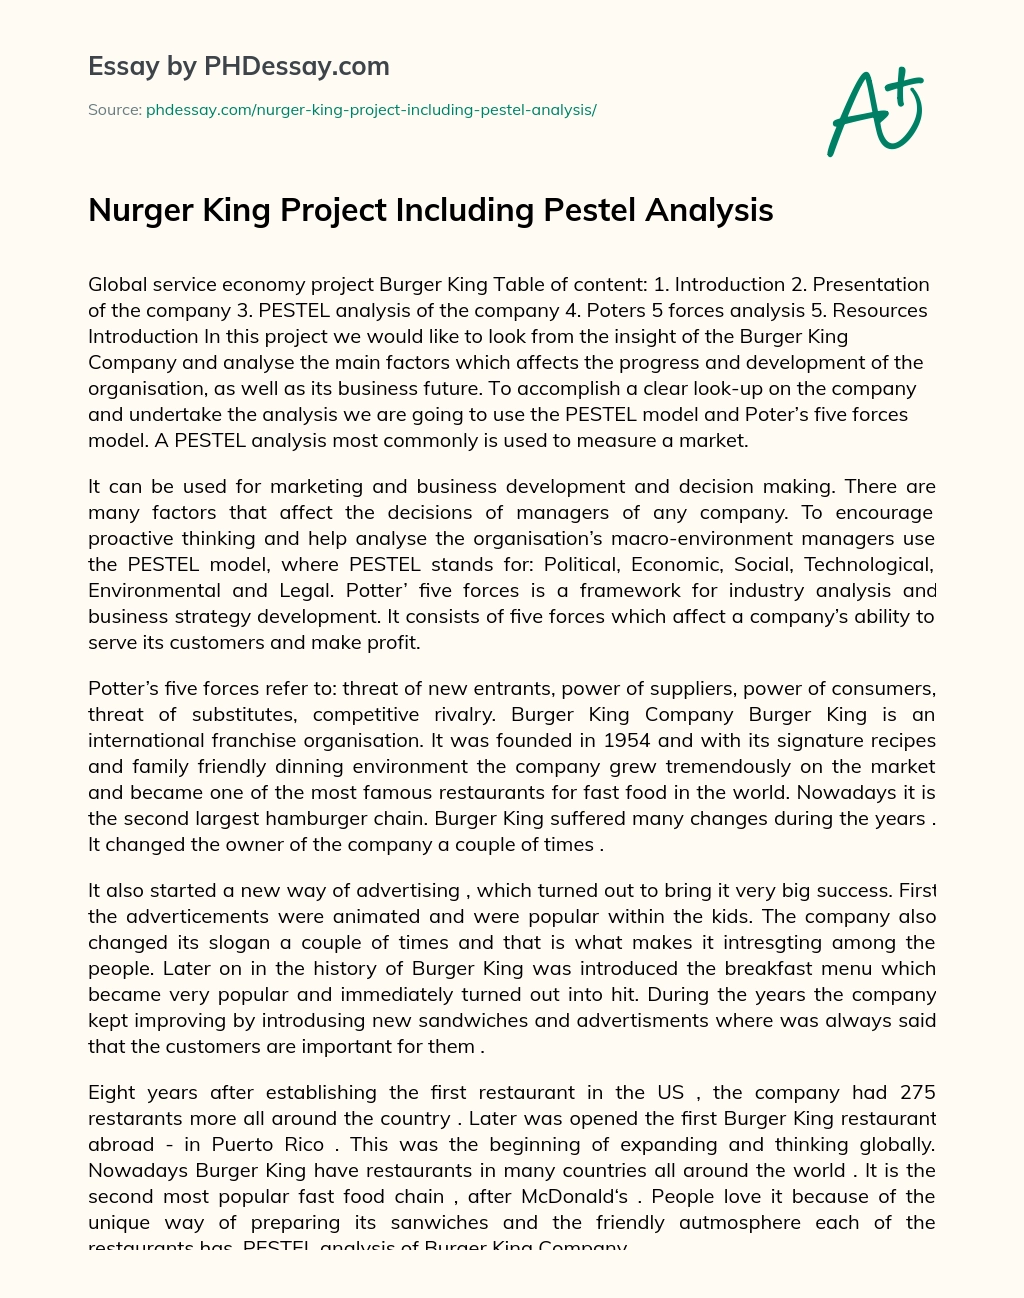 Nurger King Project Including Pestel Analysis essay